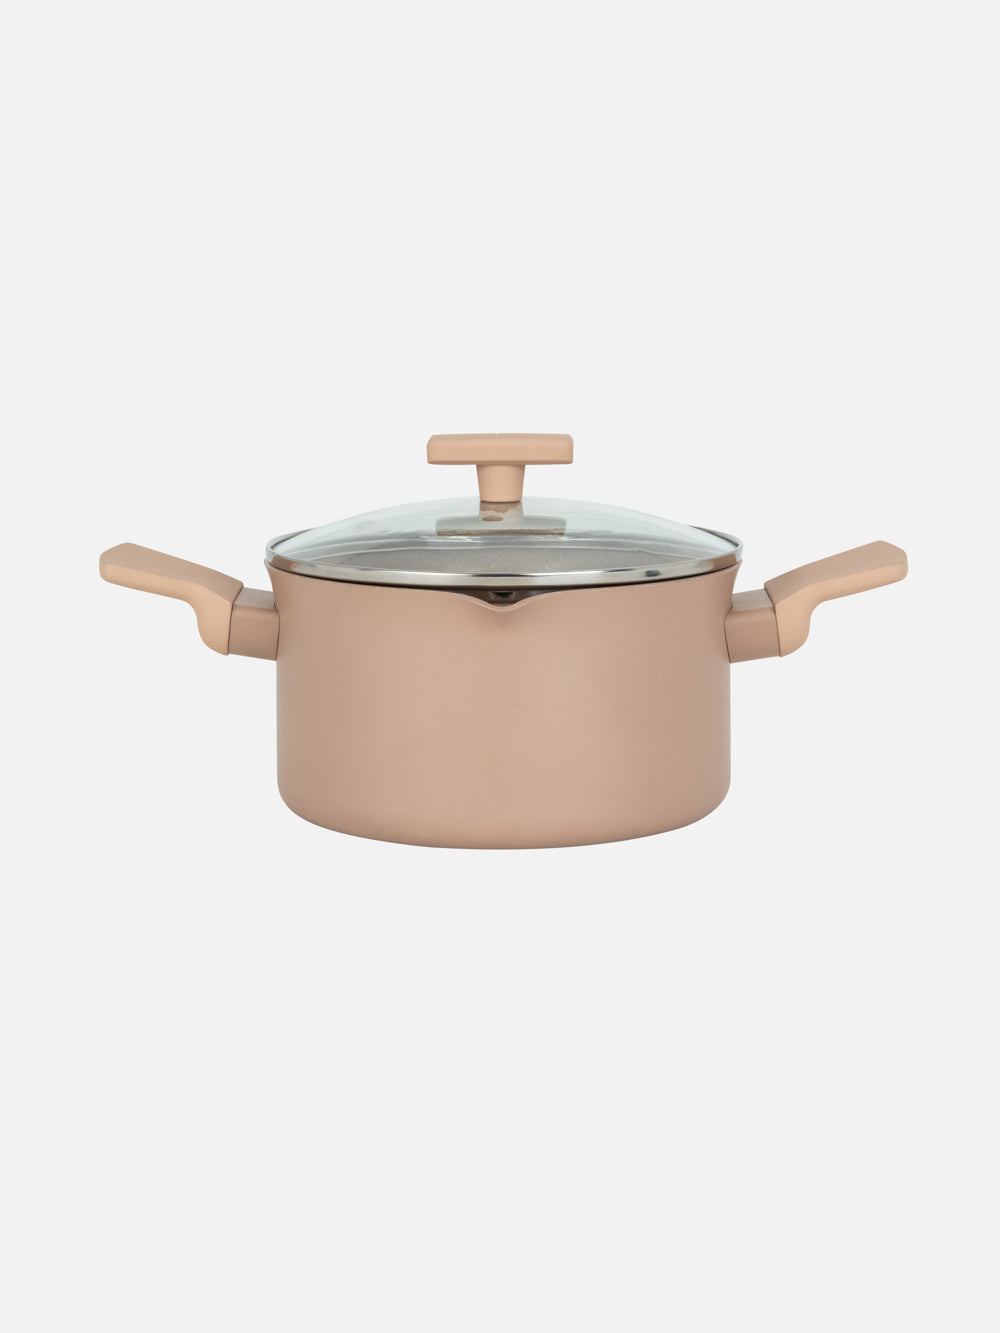 Lucia 7.8" Nonstick Pot with Lid